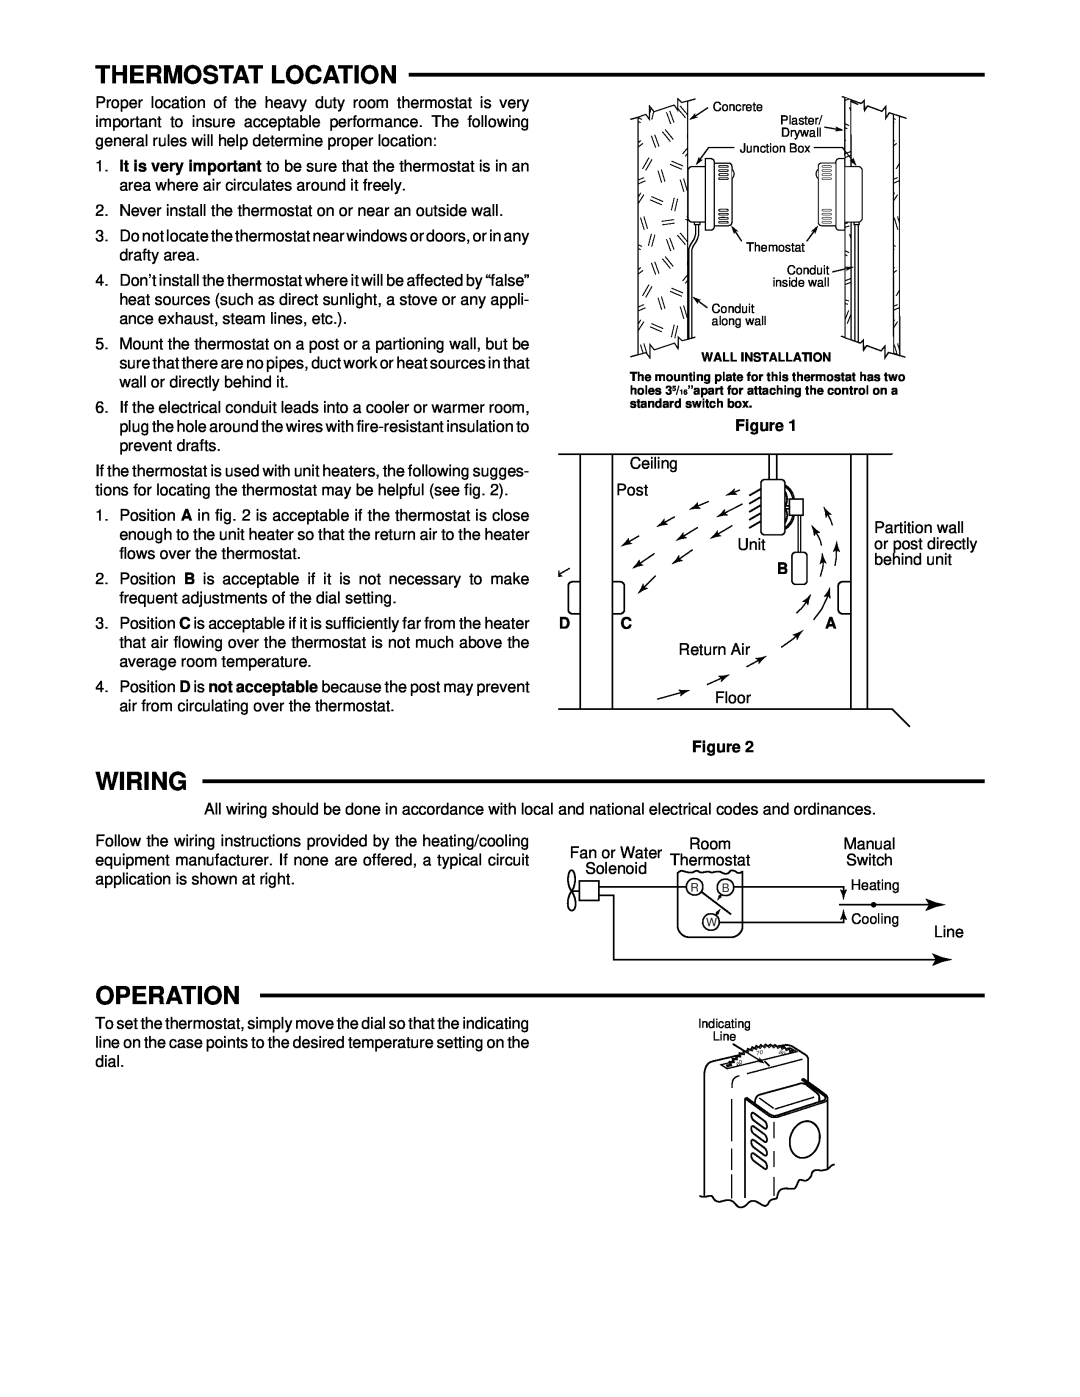 White Rodgers 179 specifications Thermostat Location, Wiring, Operation 